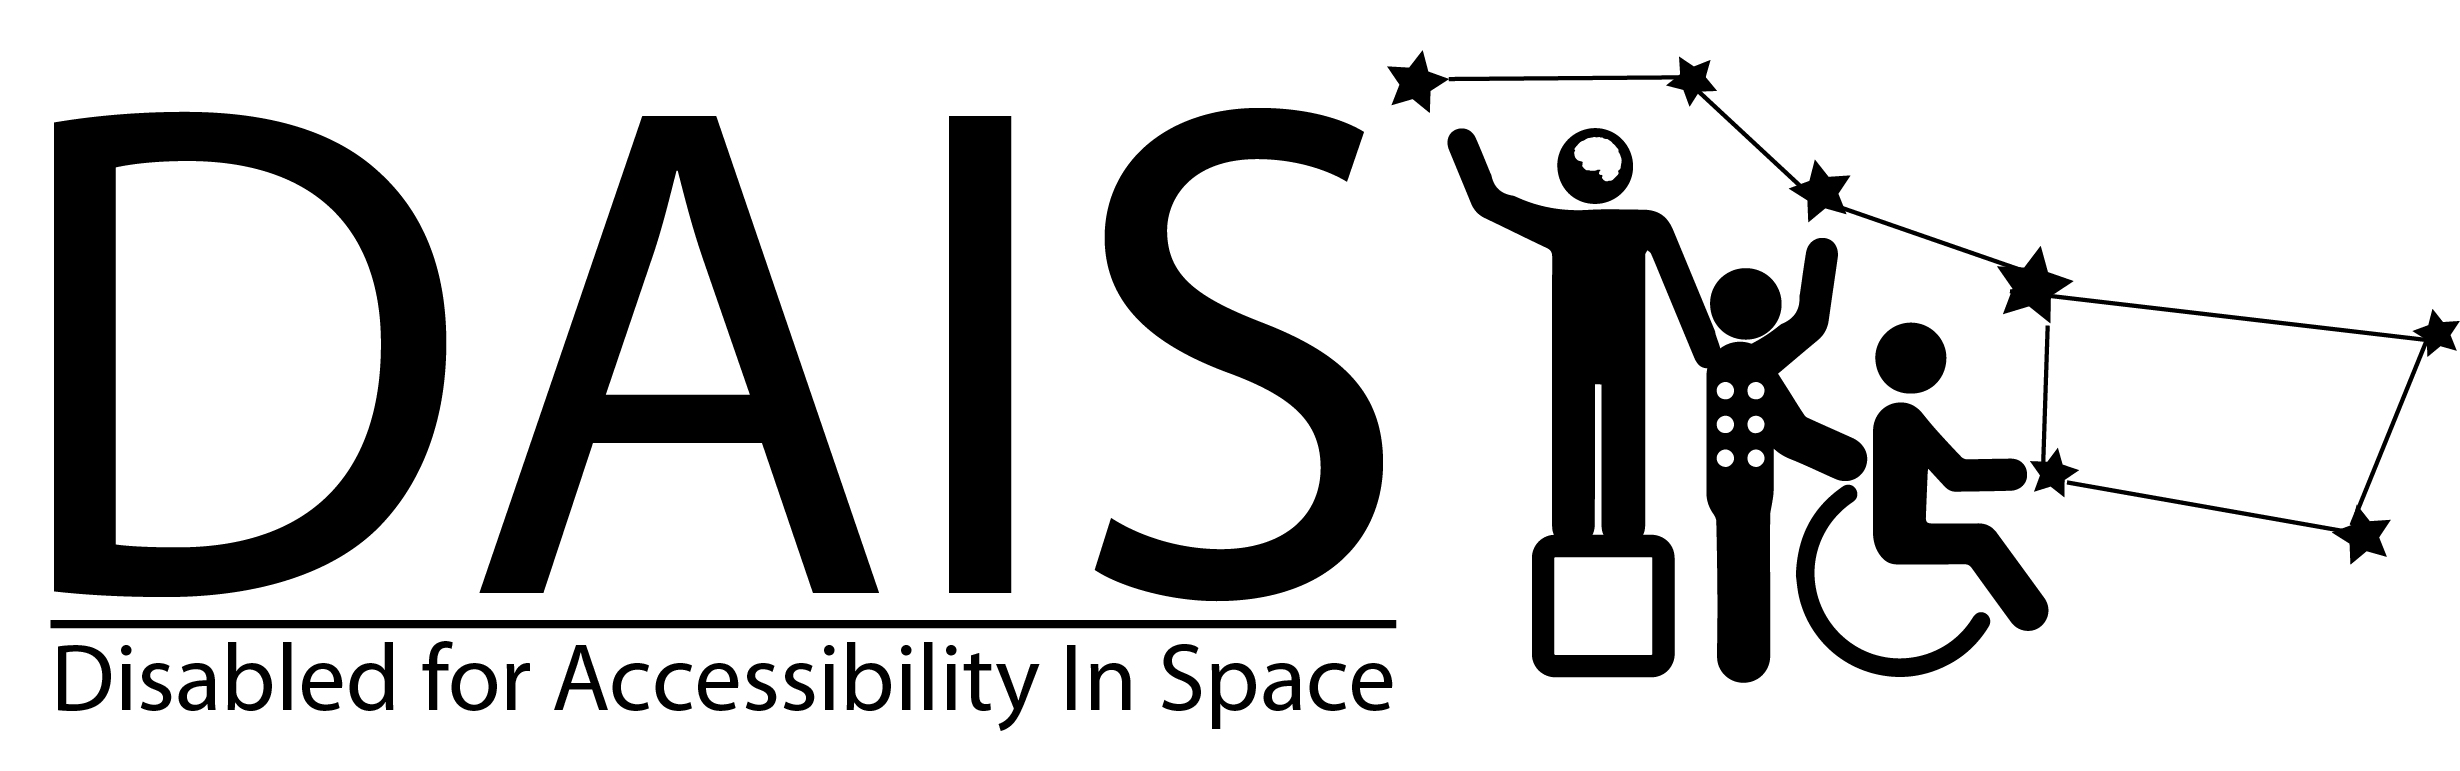 Disabled for Accessibility in Space logo